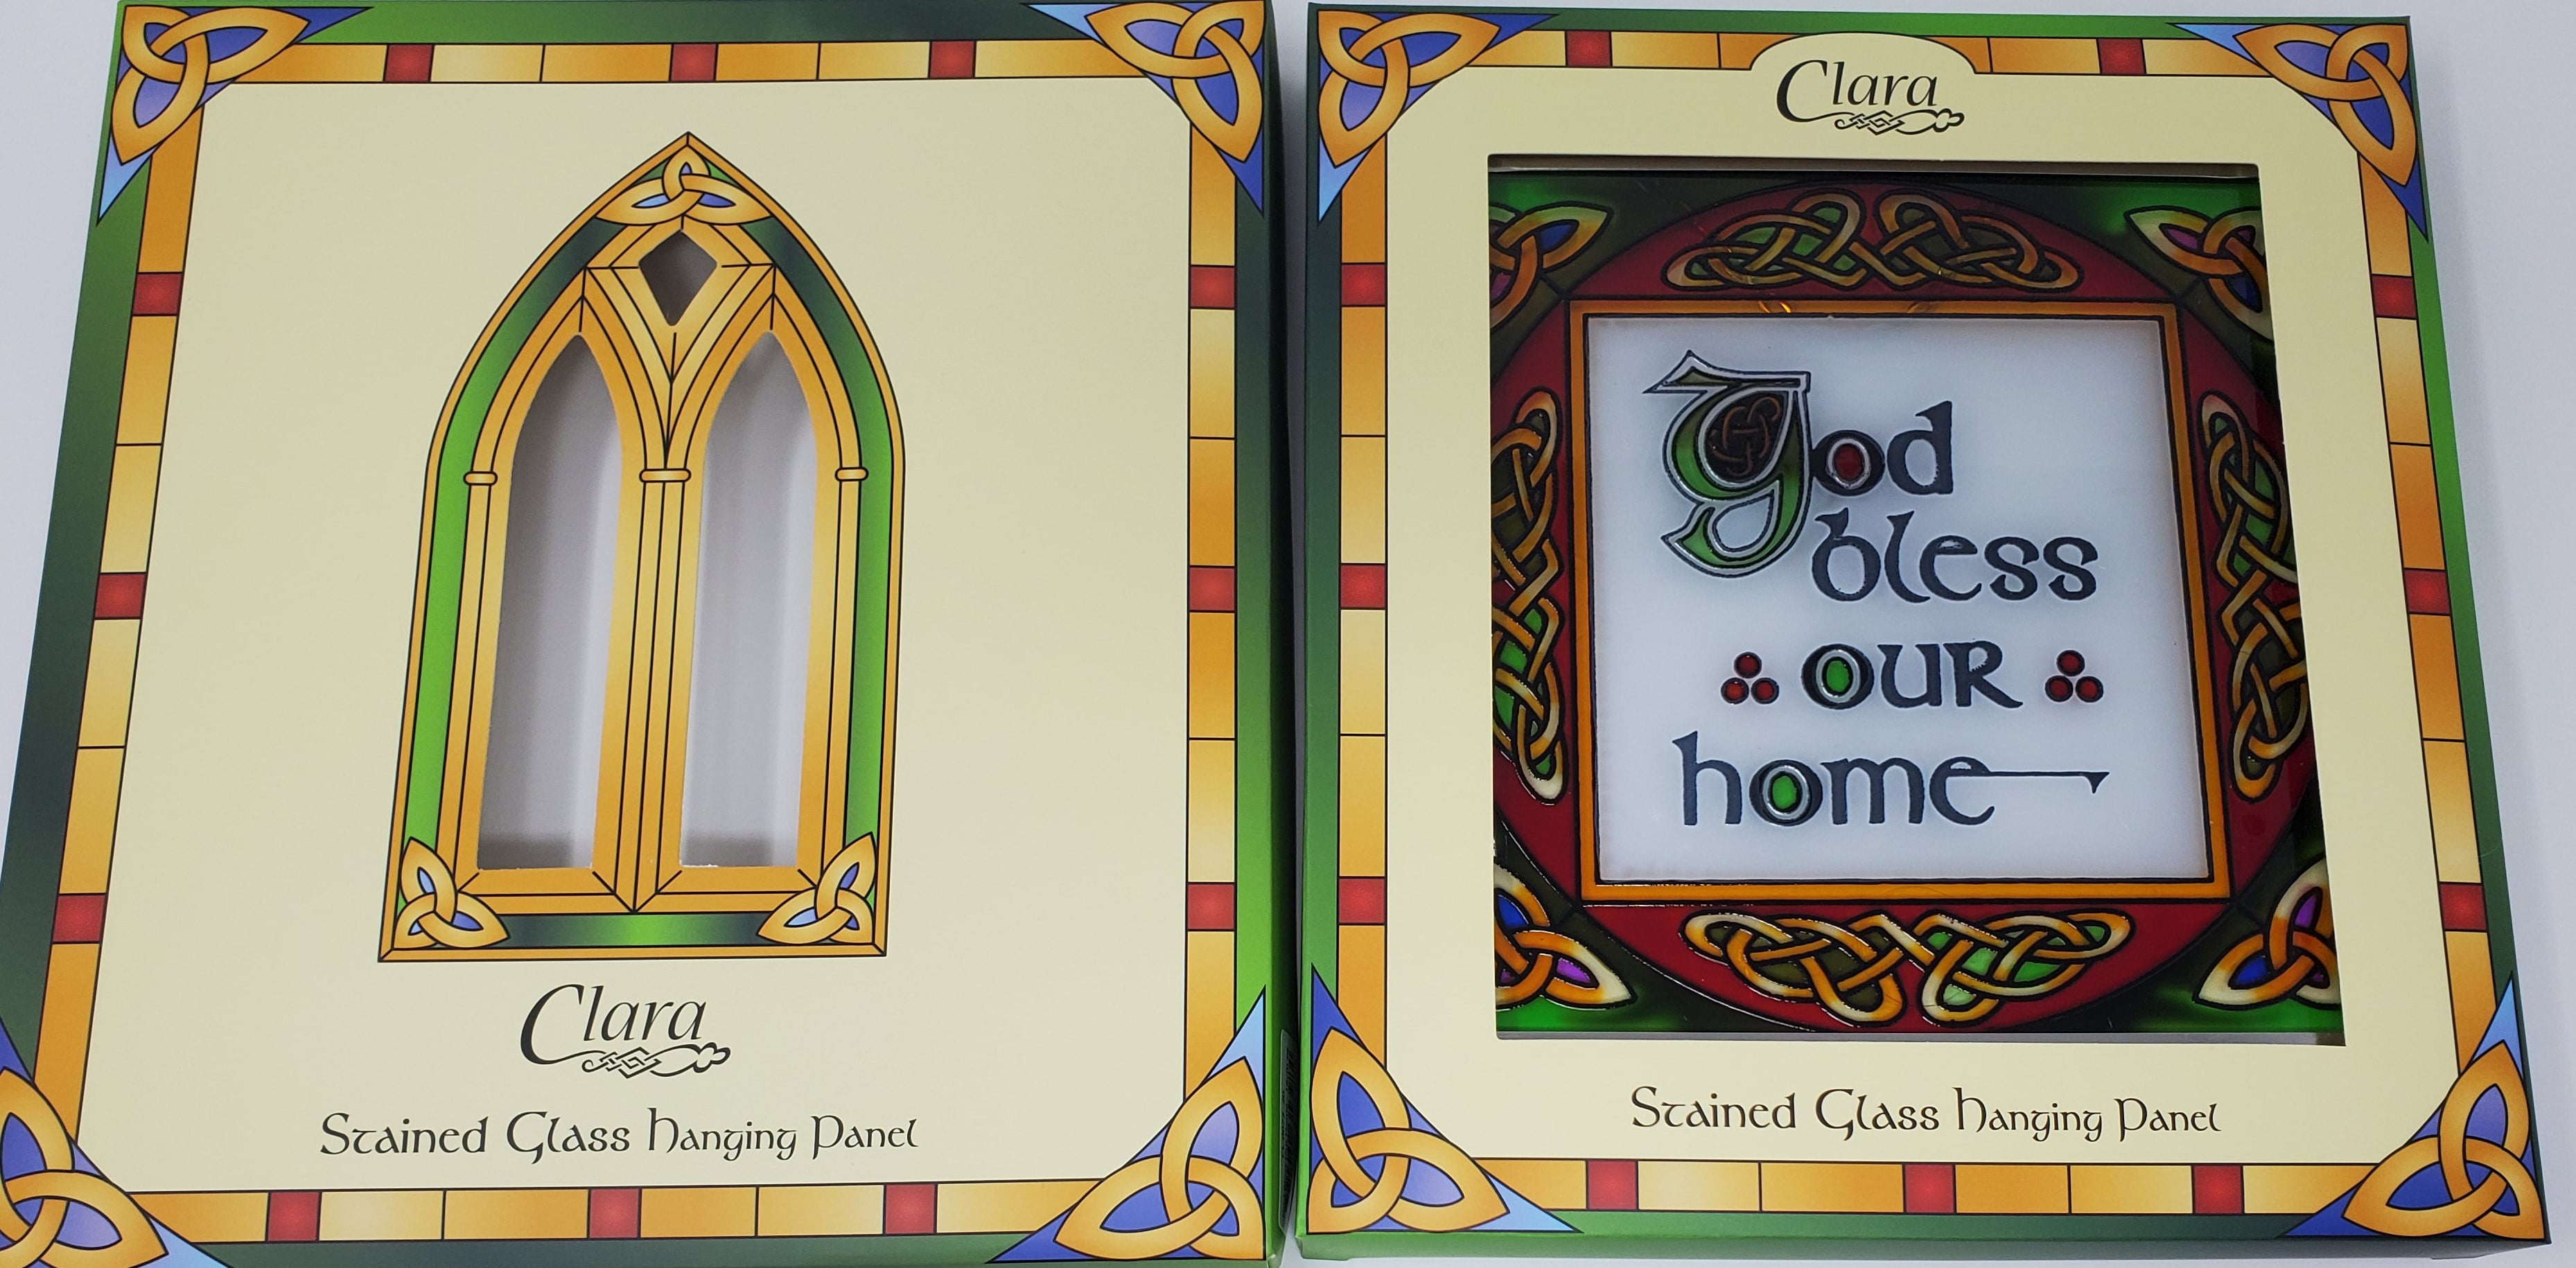 STAINED GLASS SUNCATCHER “GOD BLESS OUR HOME” 